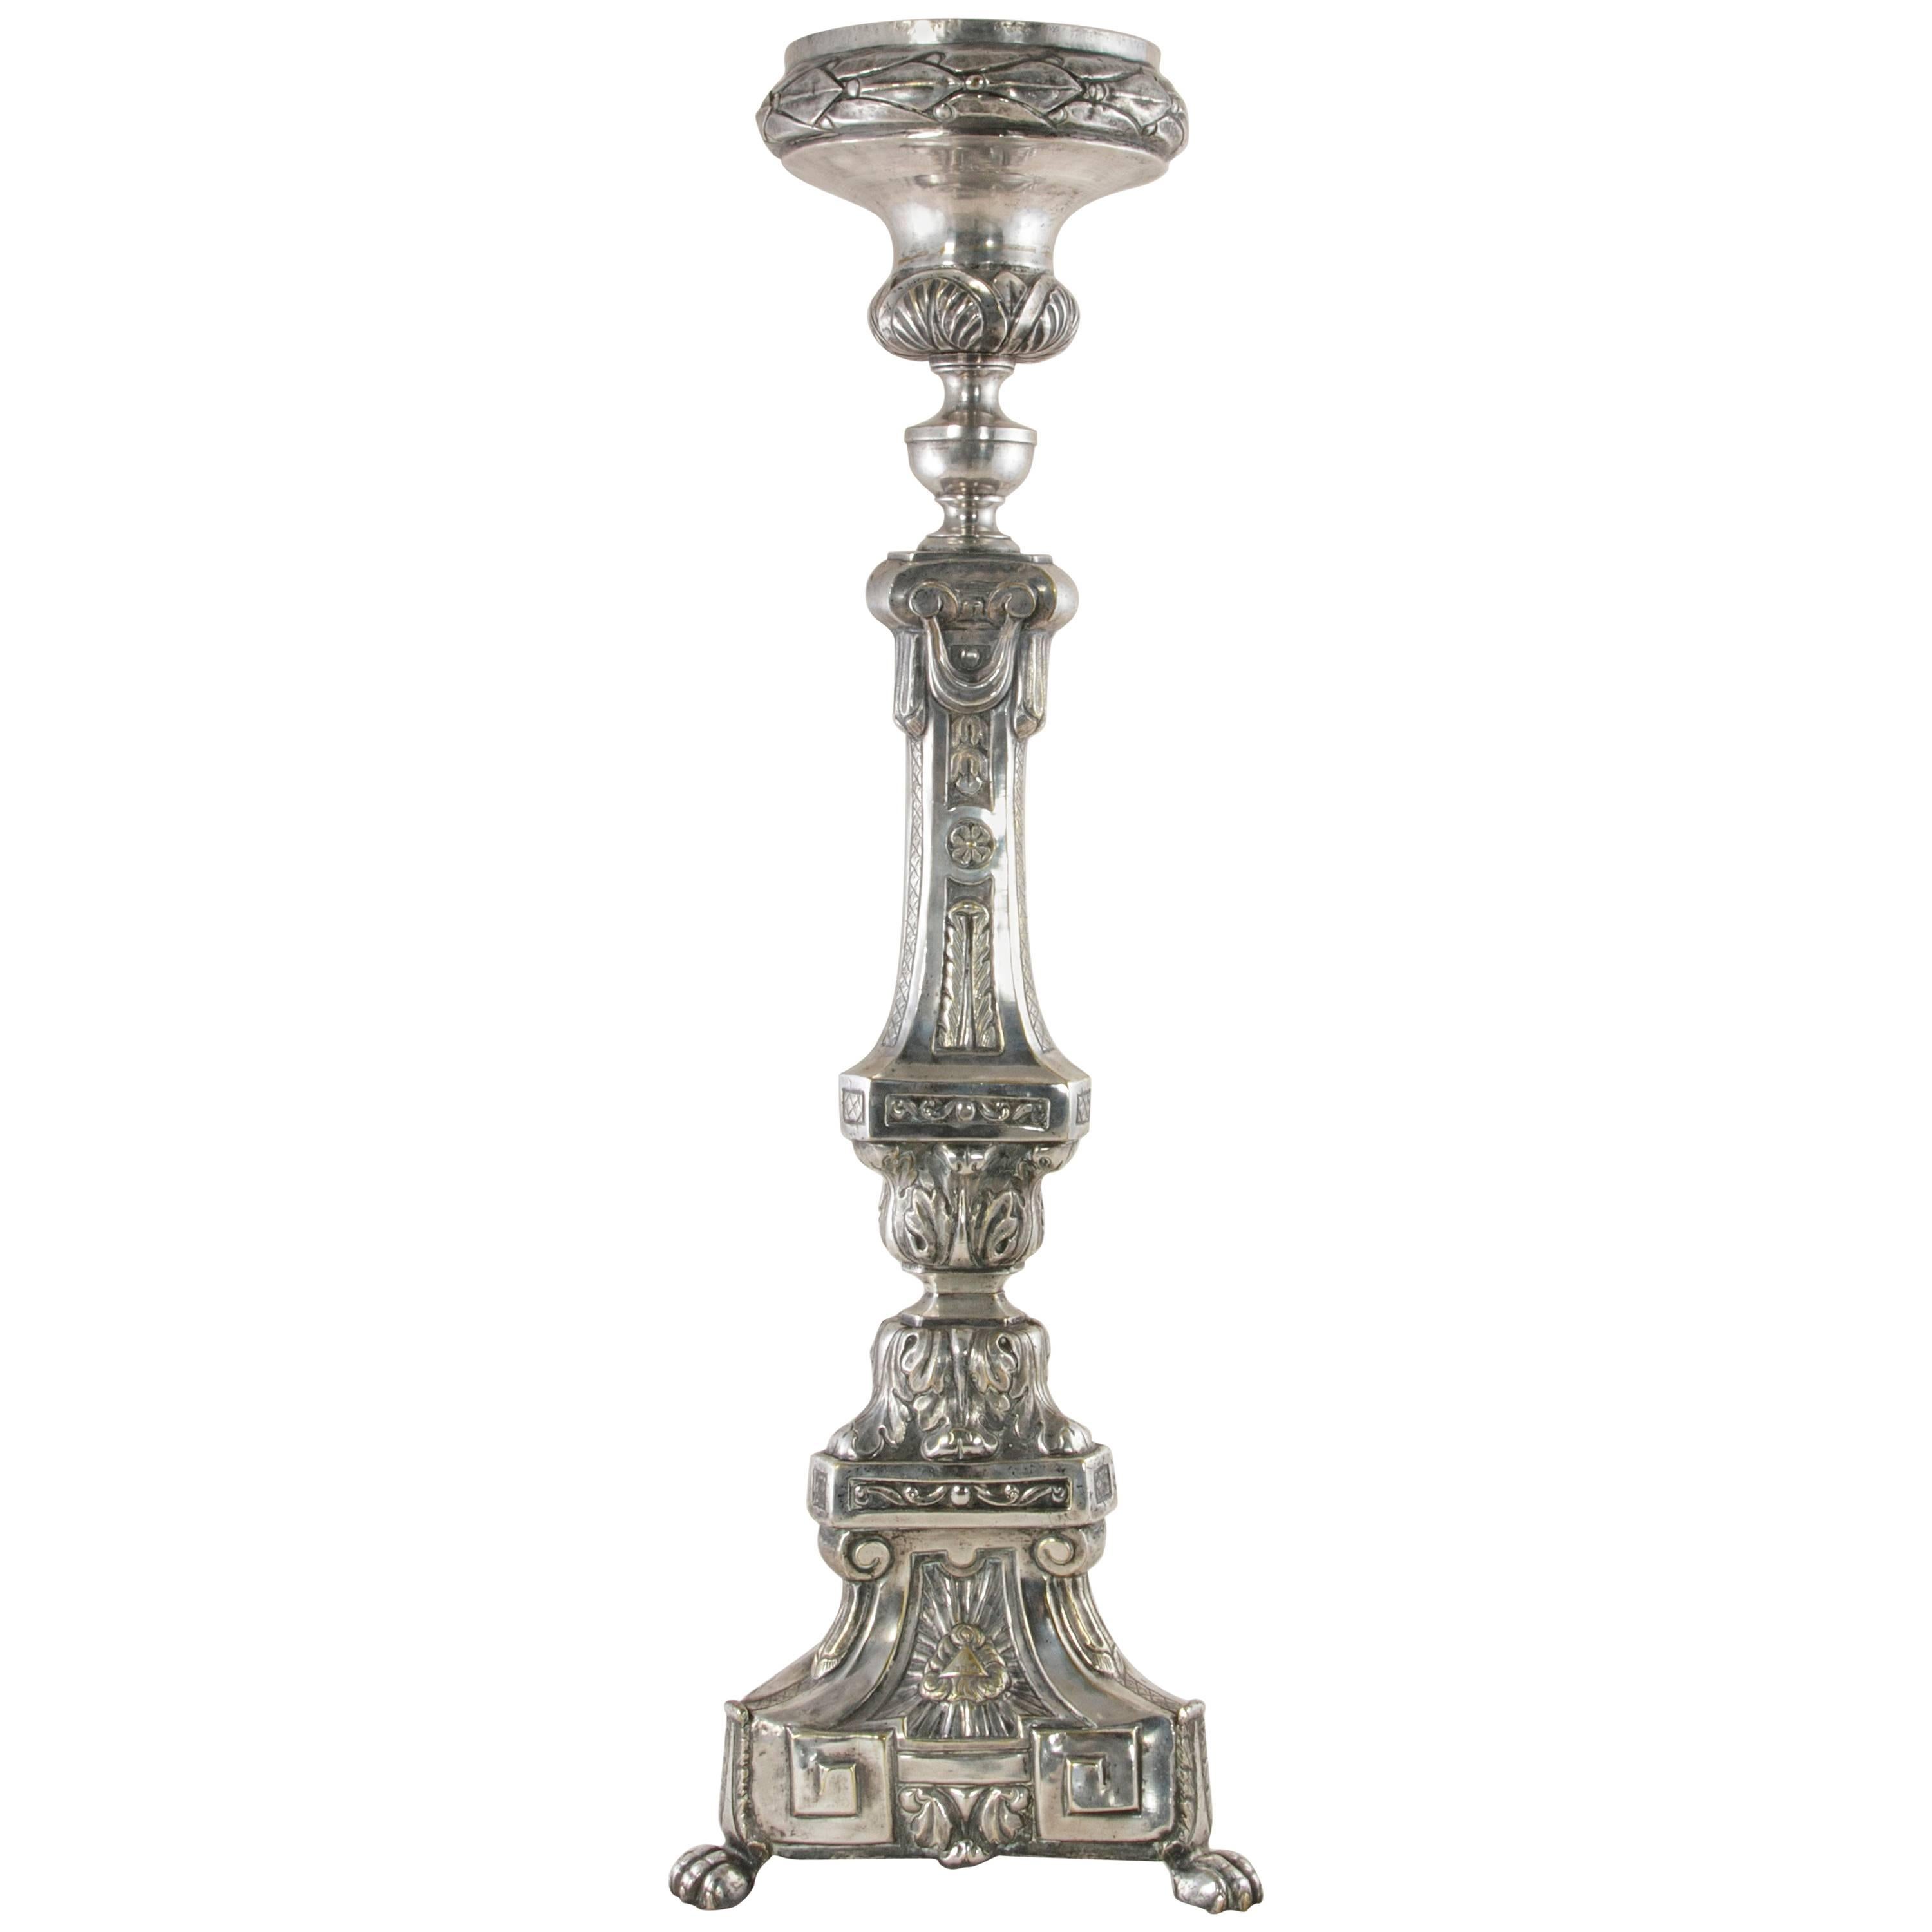 Late 19th Century Very Tall Silver Repousse Pricket, Candlestick, Pic-Cierge